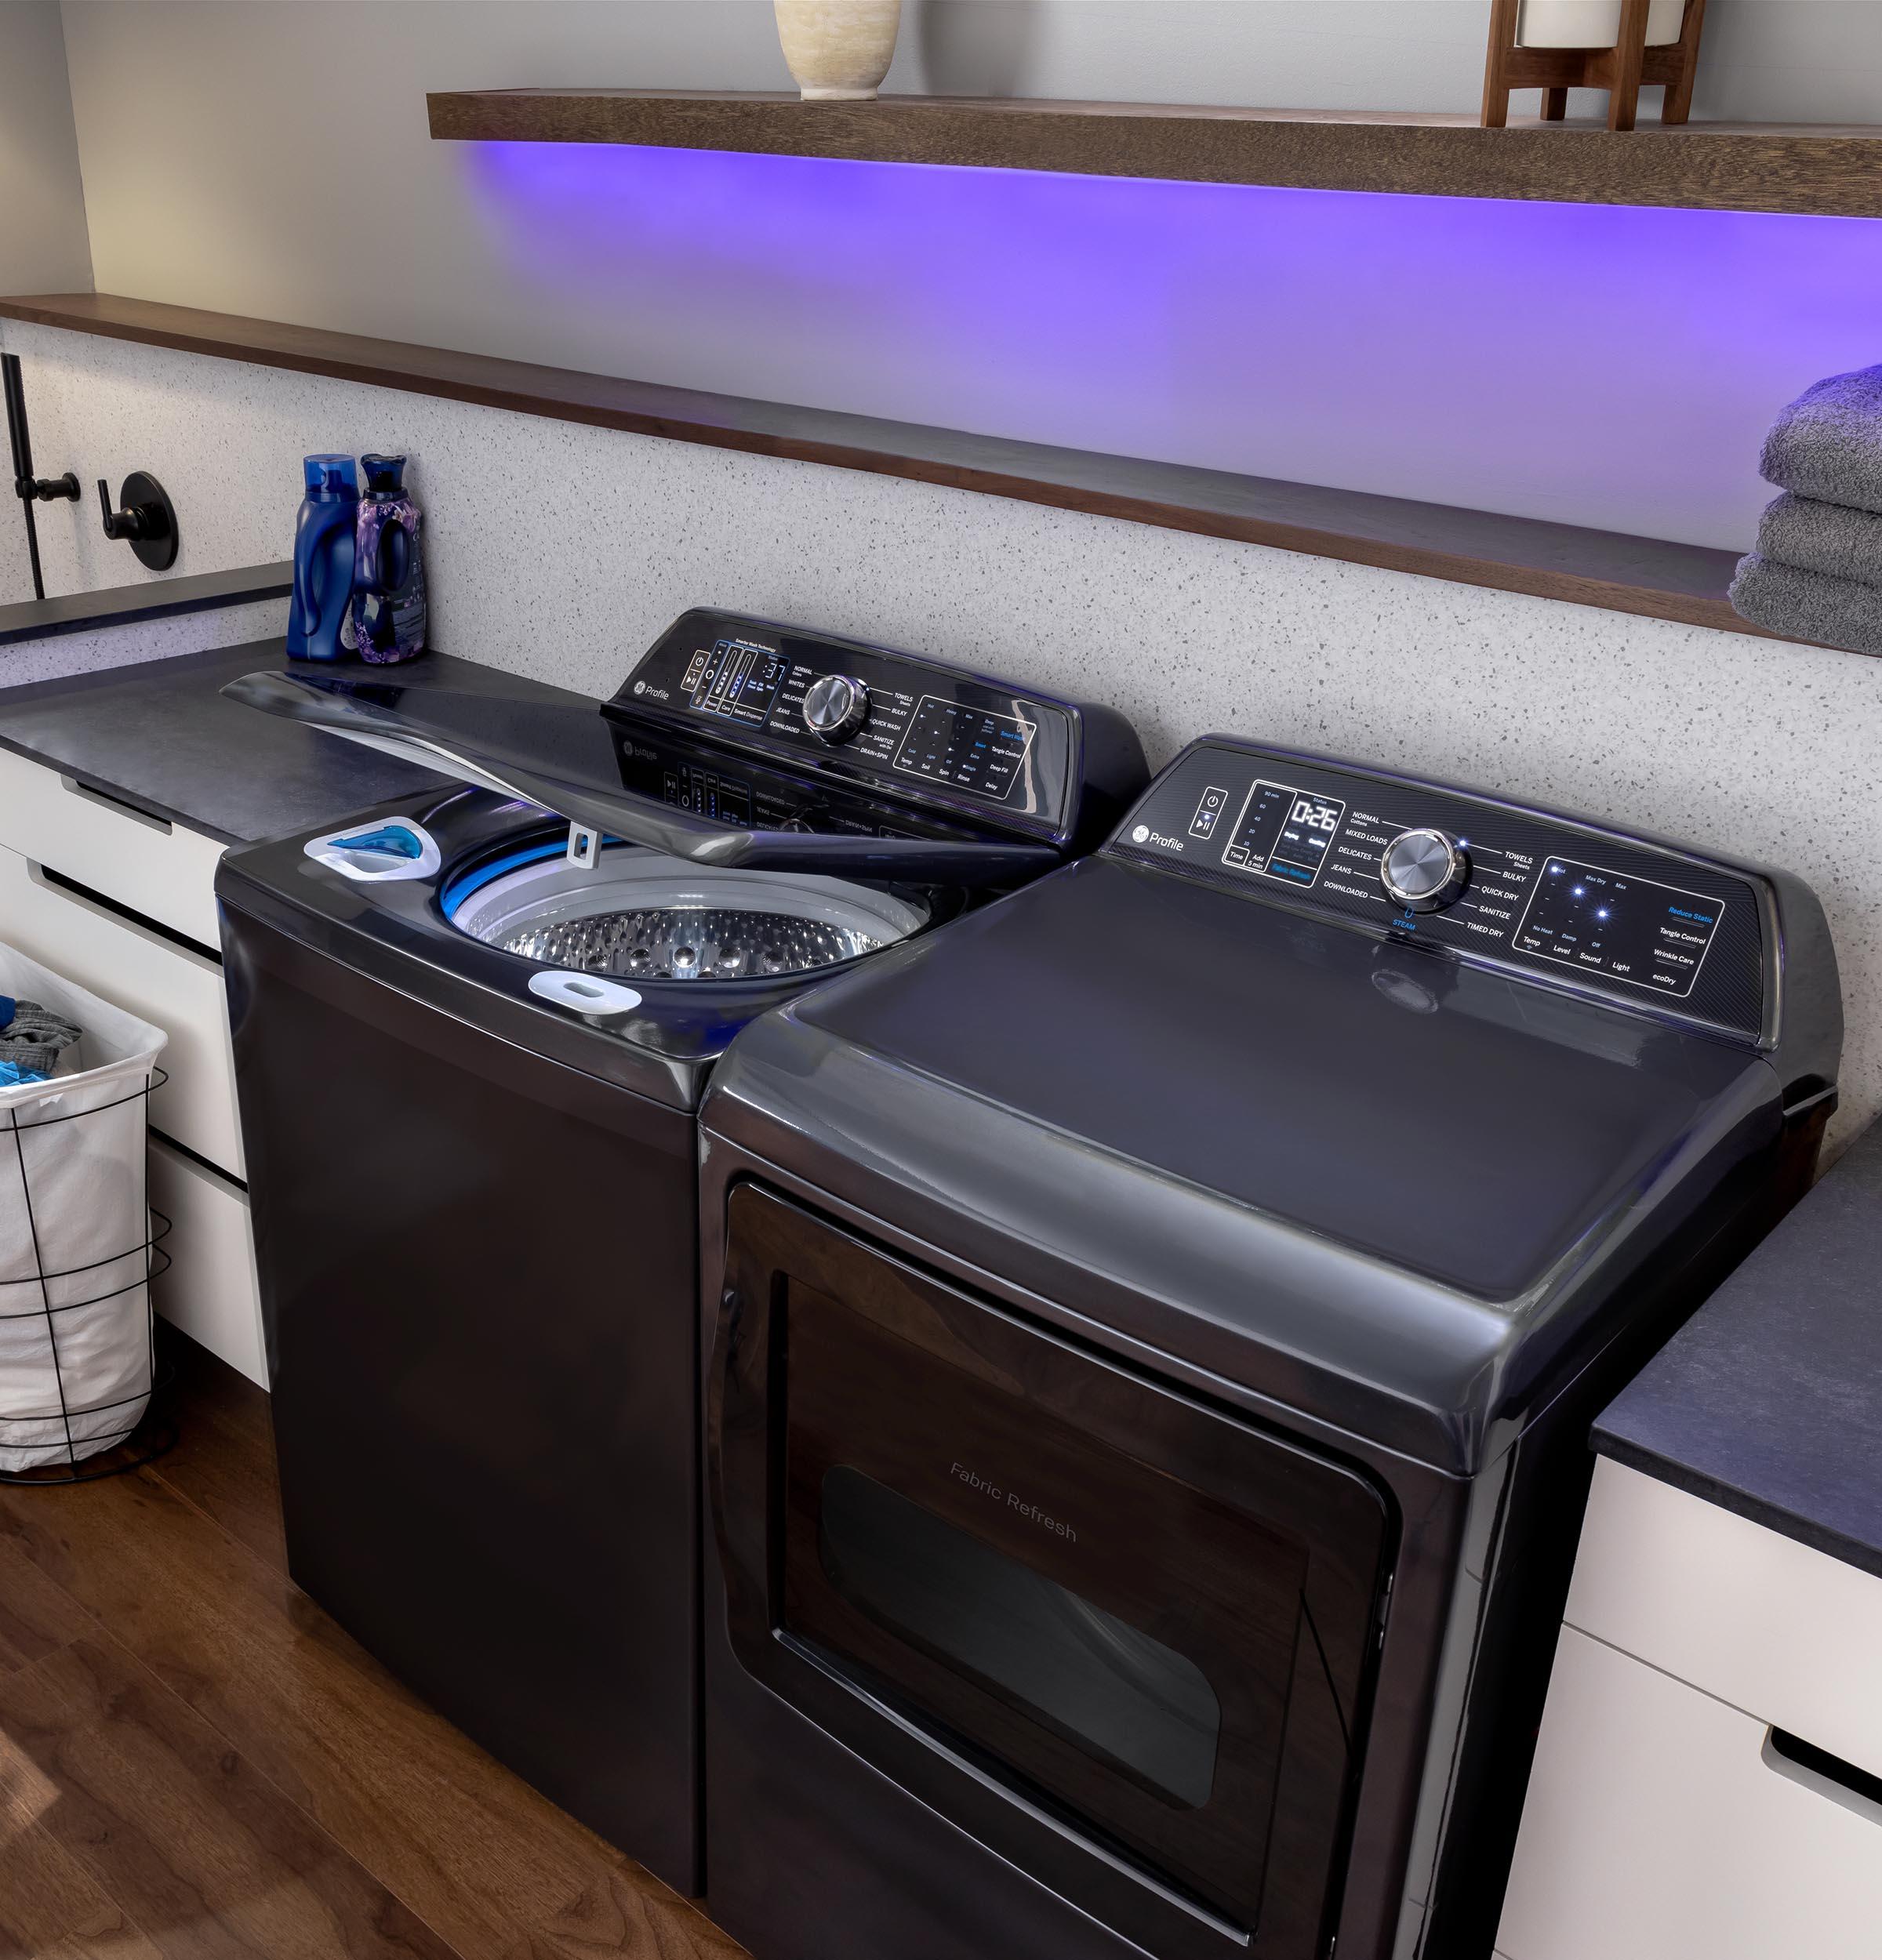 GE Profile™ ENERGY STAR® 5.4 cu. ft. Capacity Washer with Smarter Wash Technology and FlexDispense™